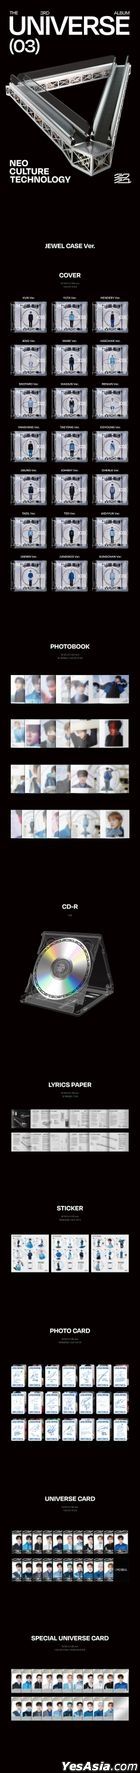 NCT Vol. 3 - Universe (Jewel Case Version) (Mark Version) + Poster in Tube